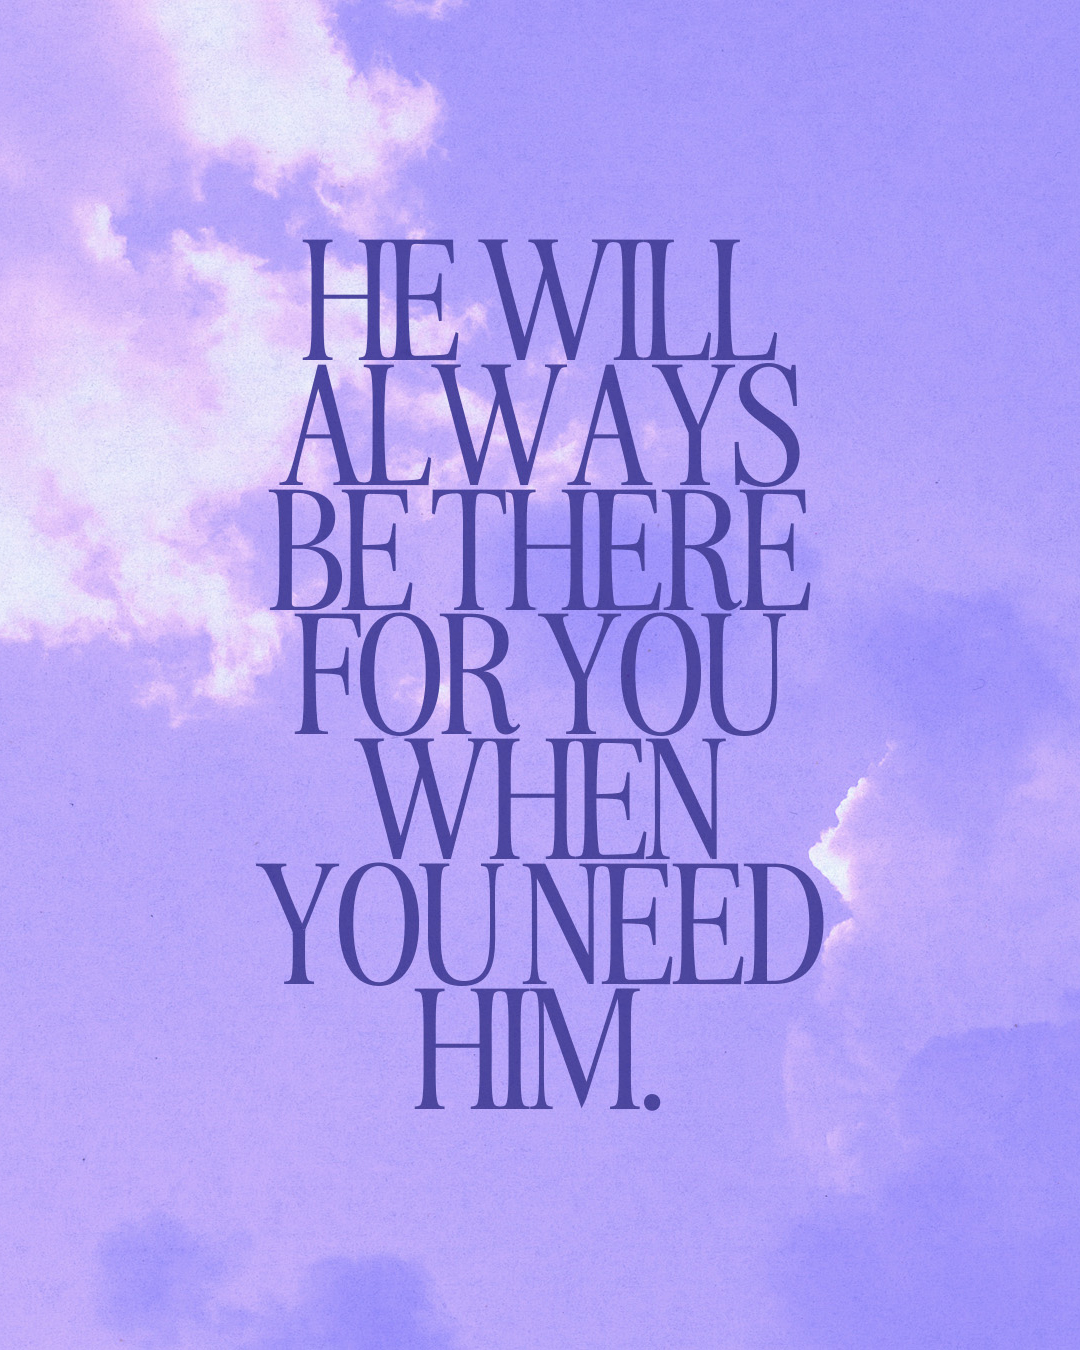 He will always be there for you